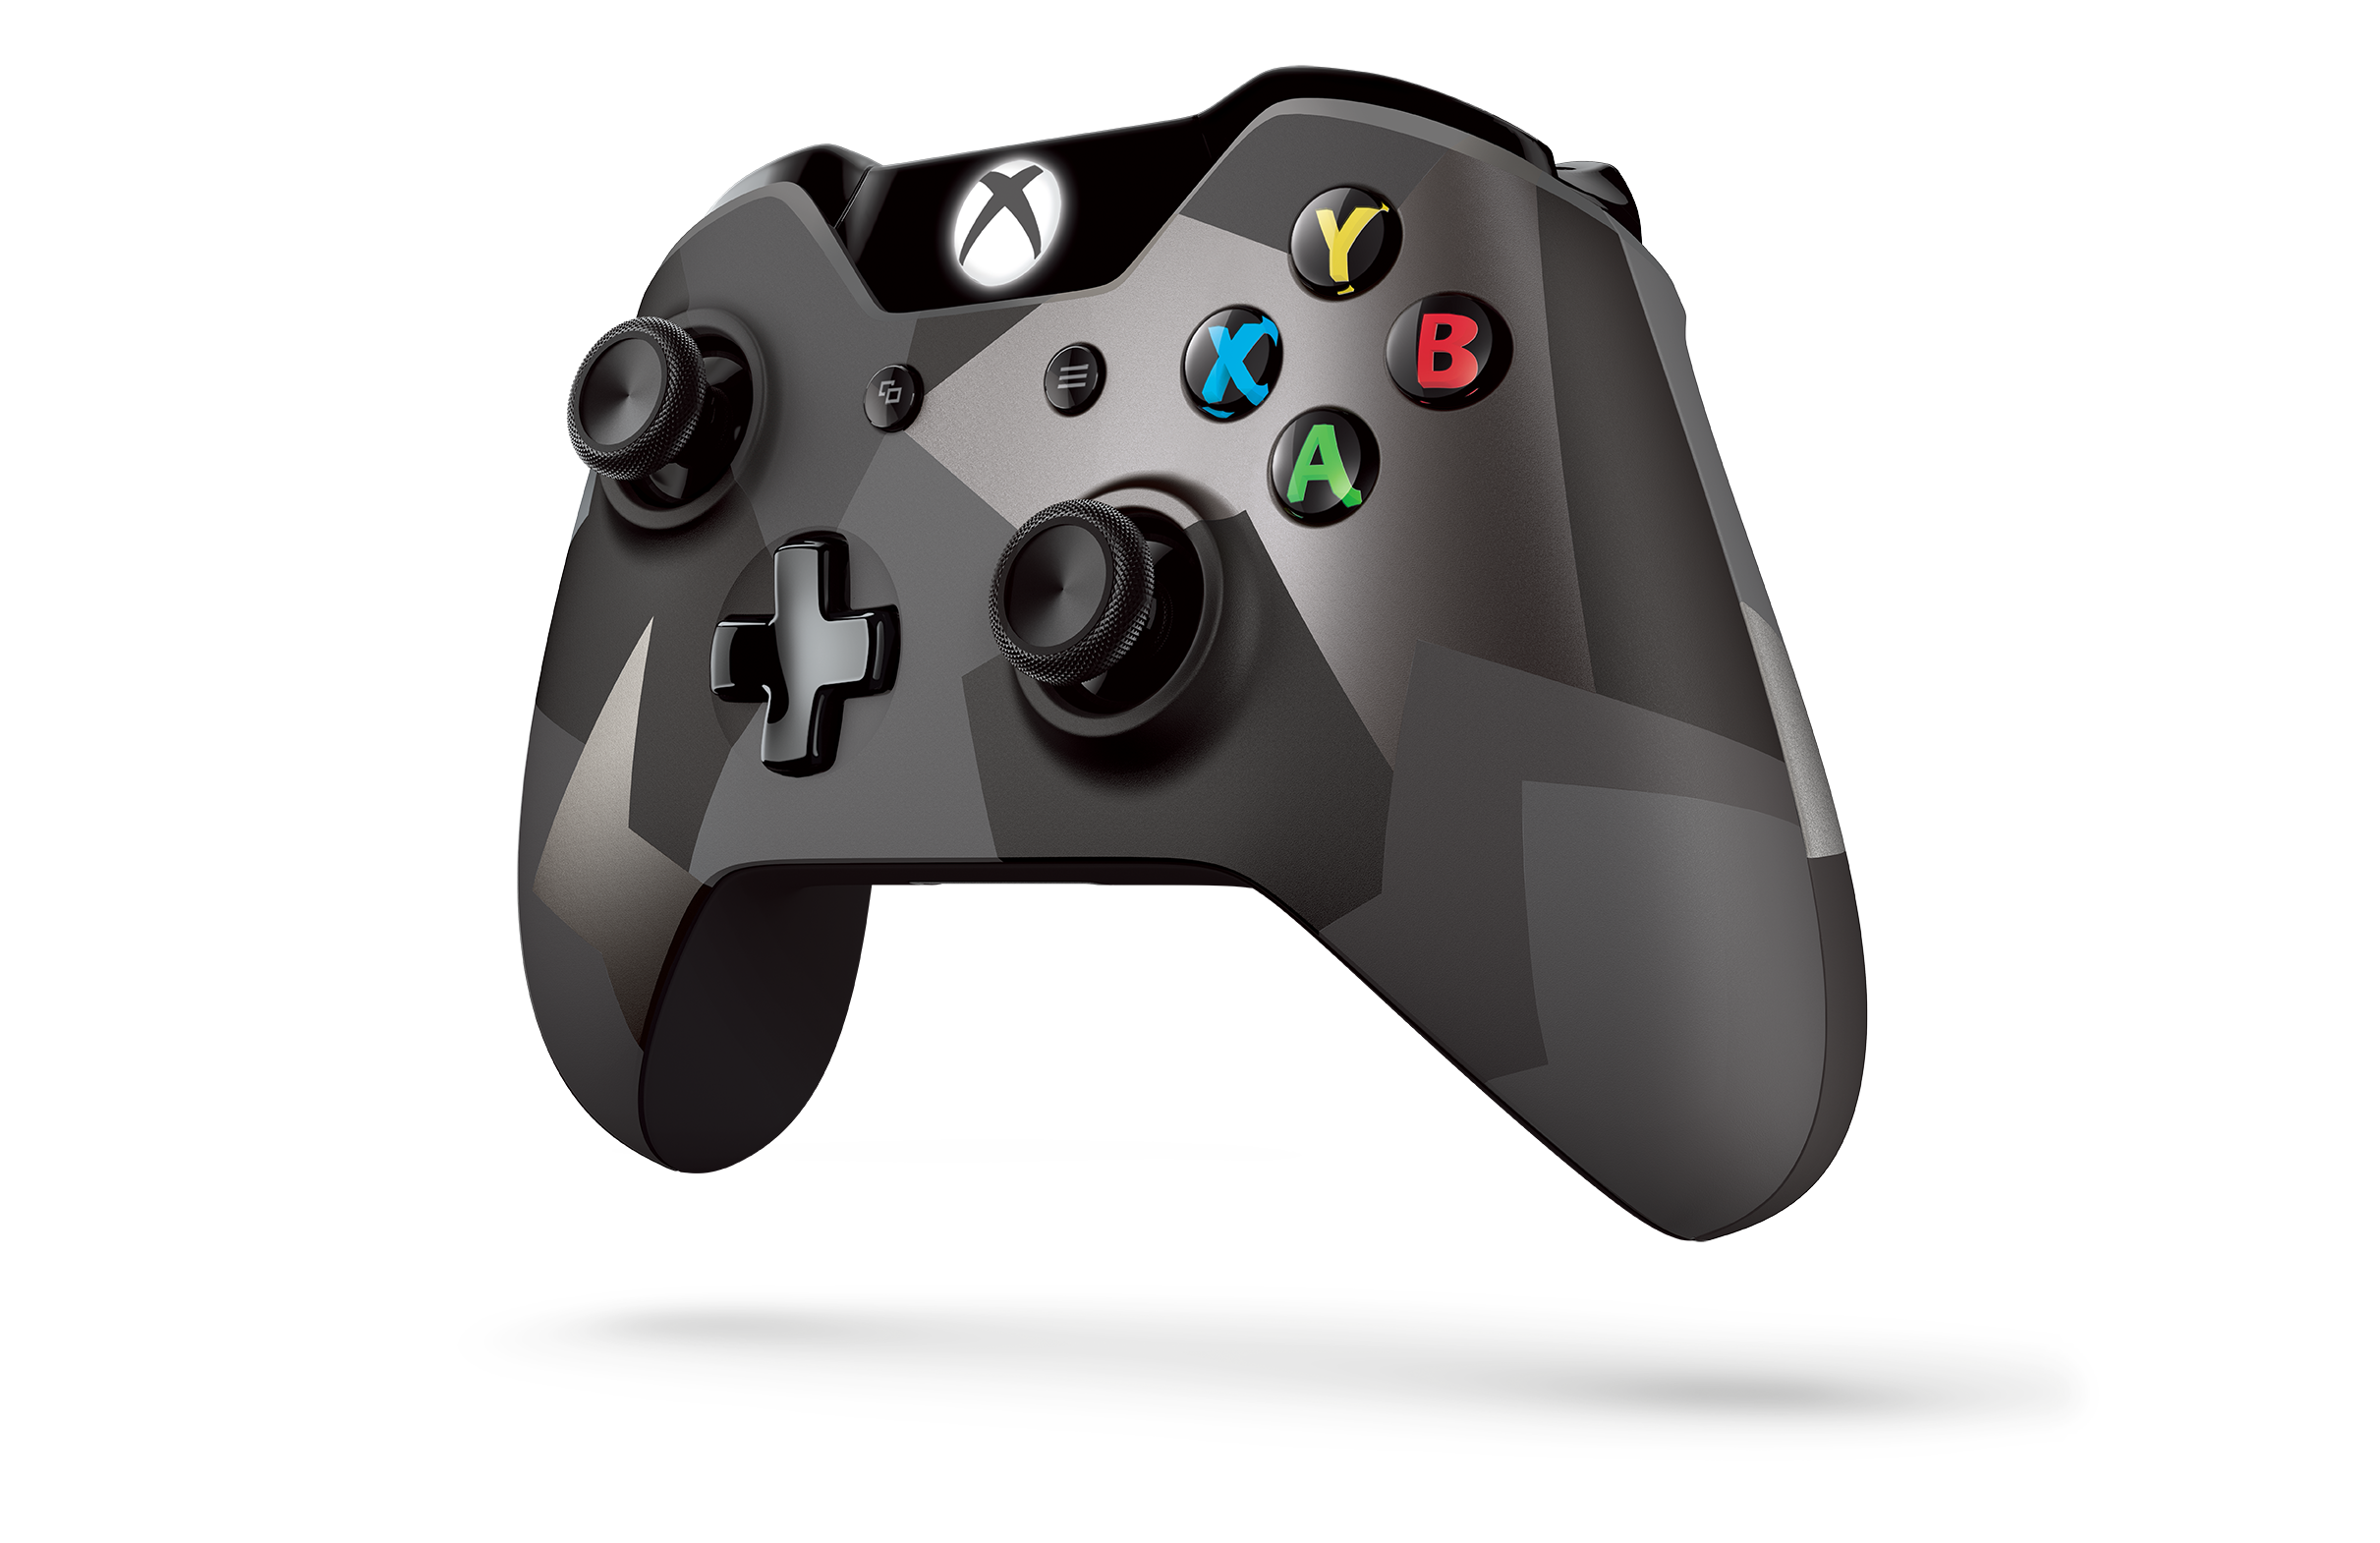 microsoft wireless controller for xbox one and pc